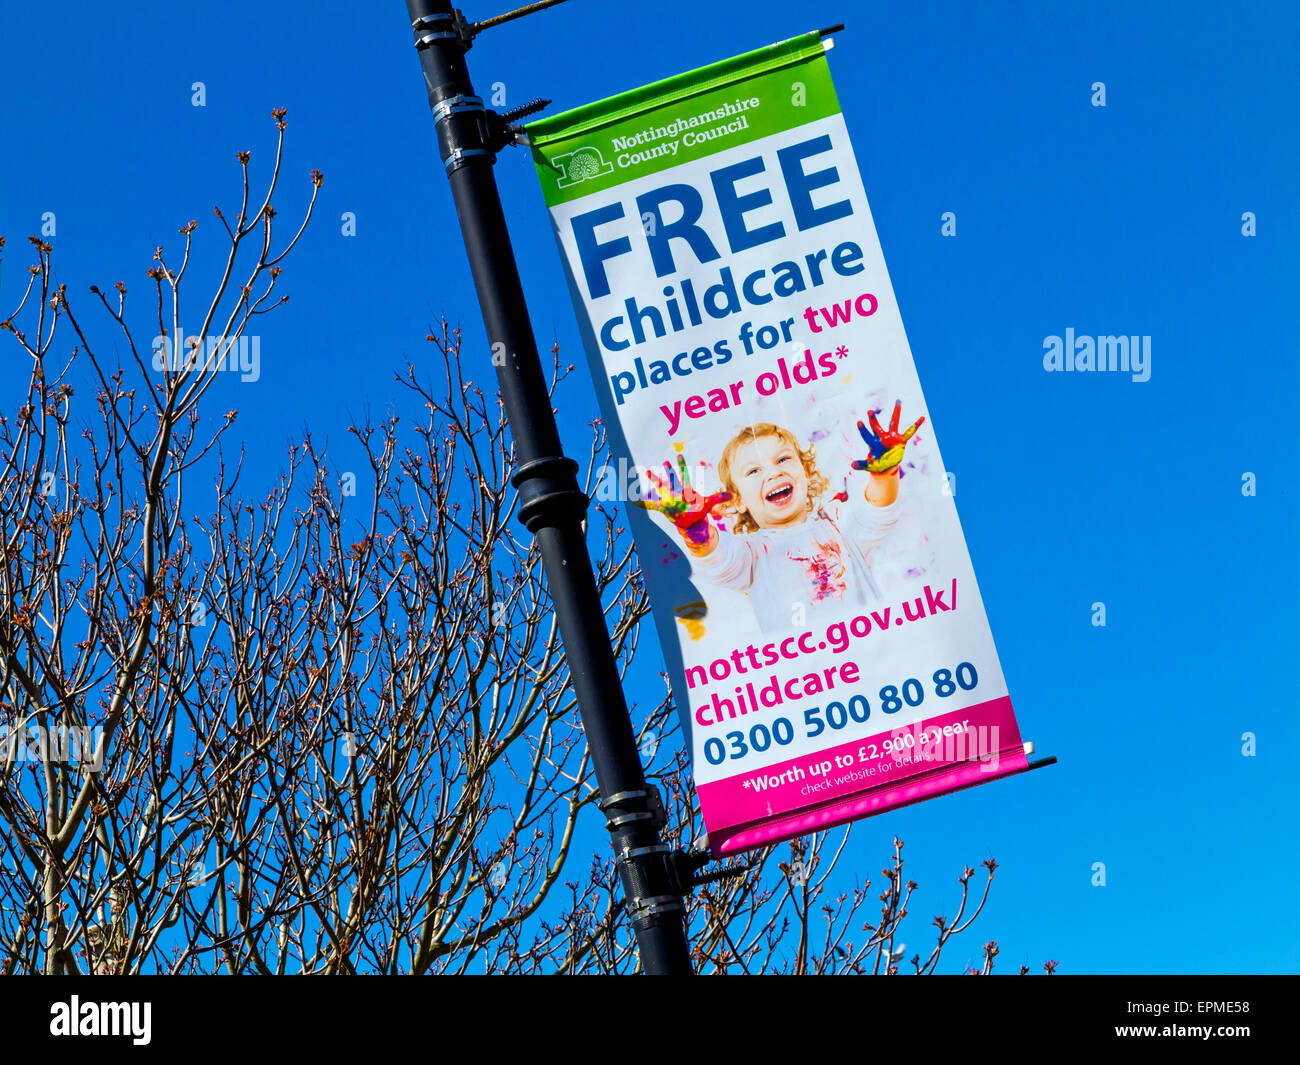 Nottinghamshire County Council Free childcare places for two year olds banner on a lamp post in Newark on Trent England UK Stock Photo